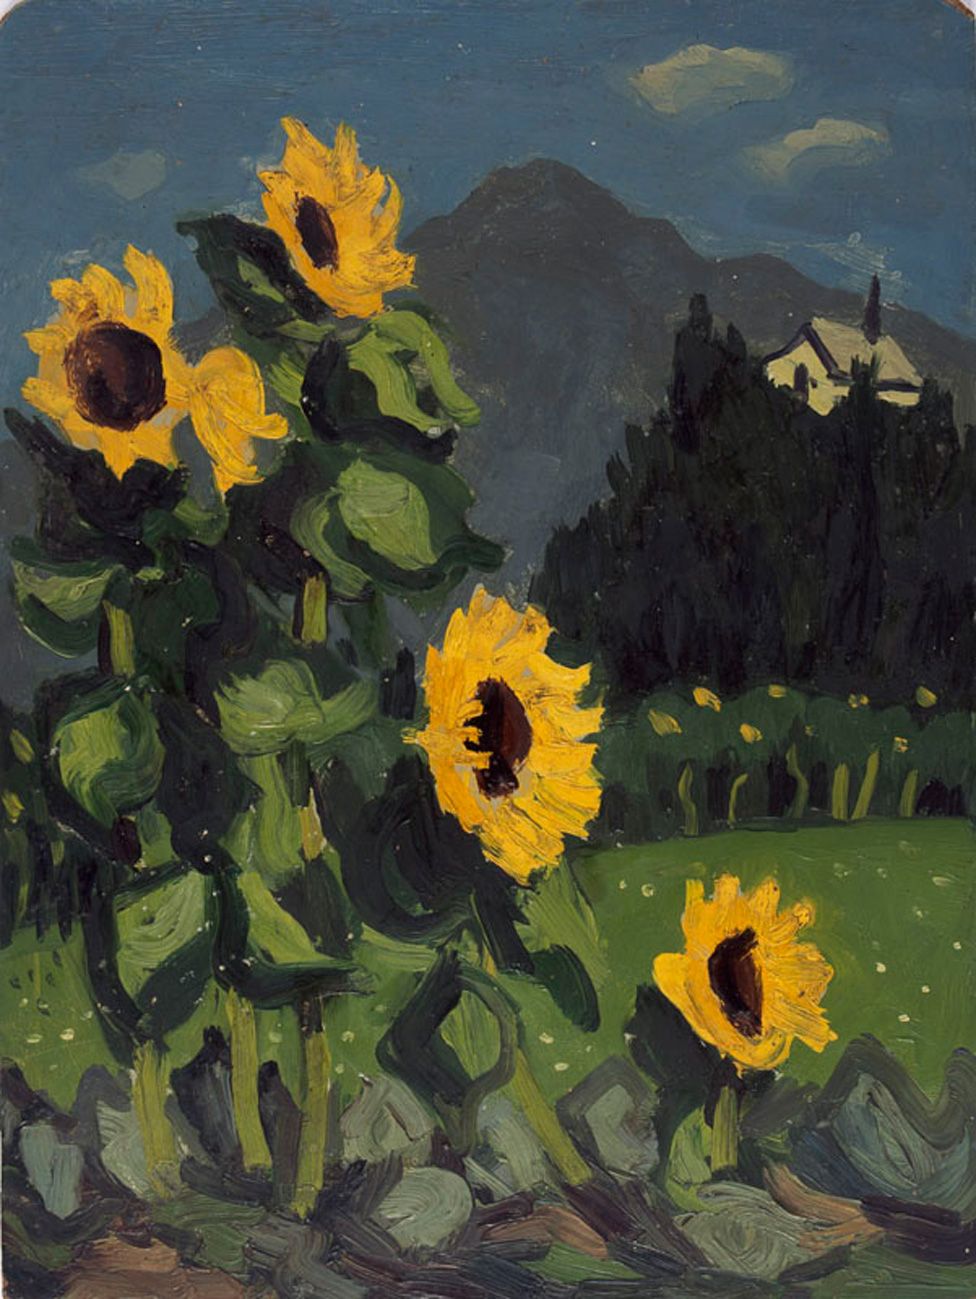 Sunflowers with mountains beyond